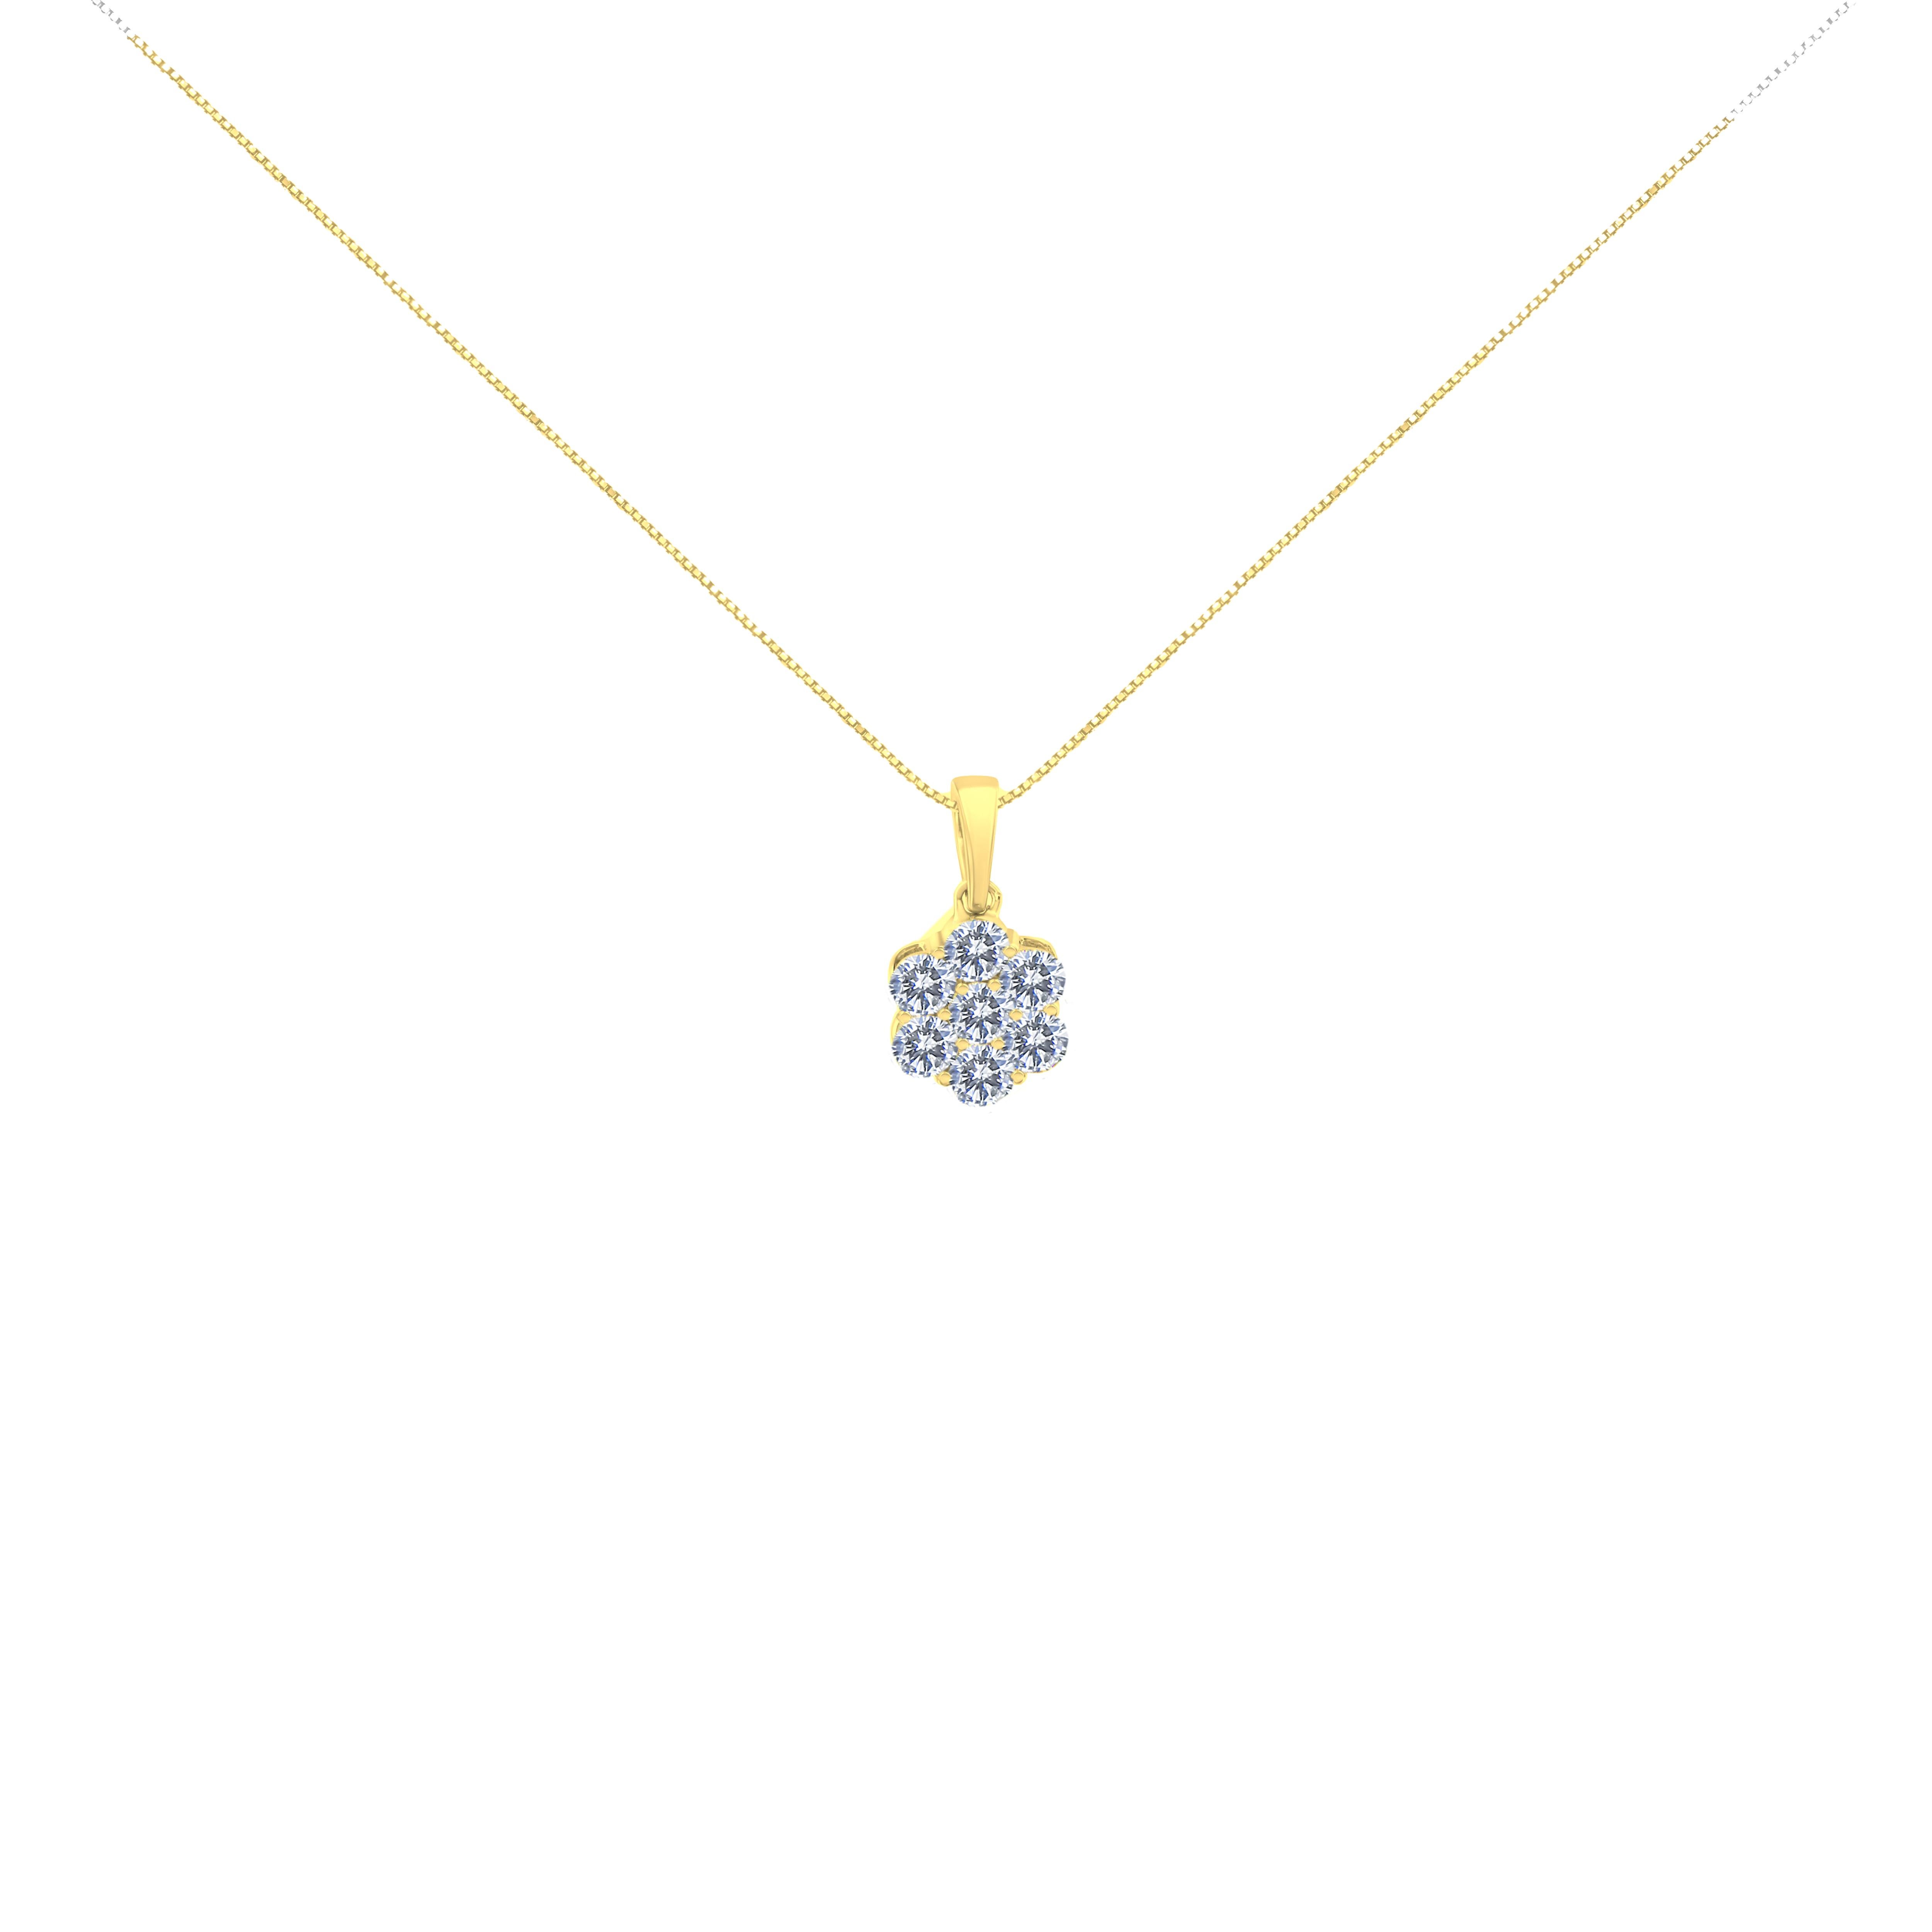 A timeless design with an elegant twist, this 14k yellow gold pendant features a floral design that will complement any outfit in your closet. Seven natural round-cut diamonds sparkle in a prong setting on this necklace, as the flowery motif hangs